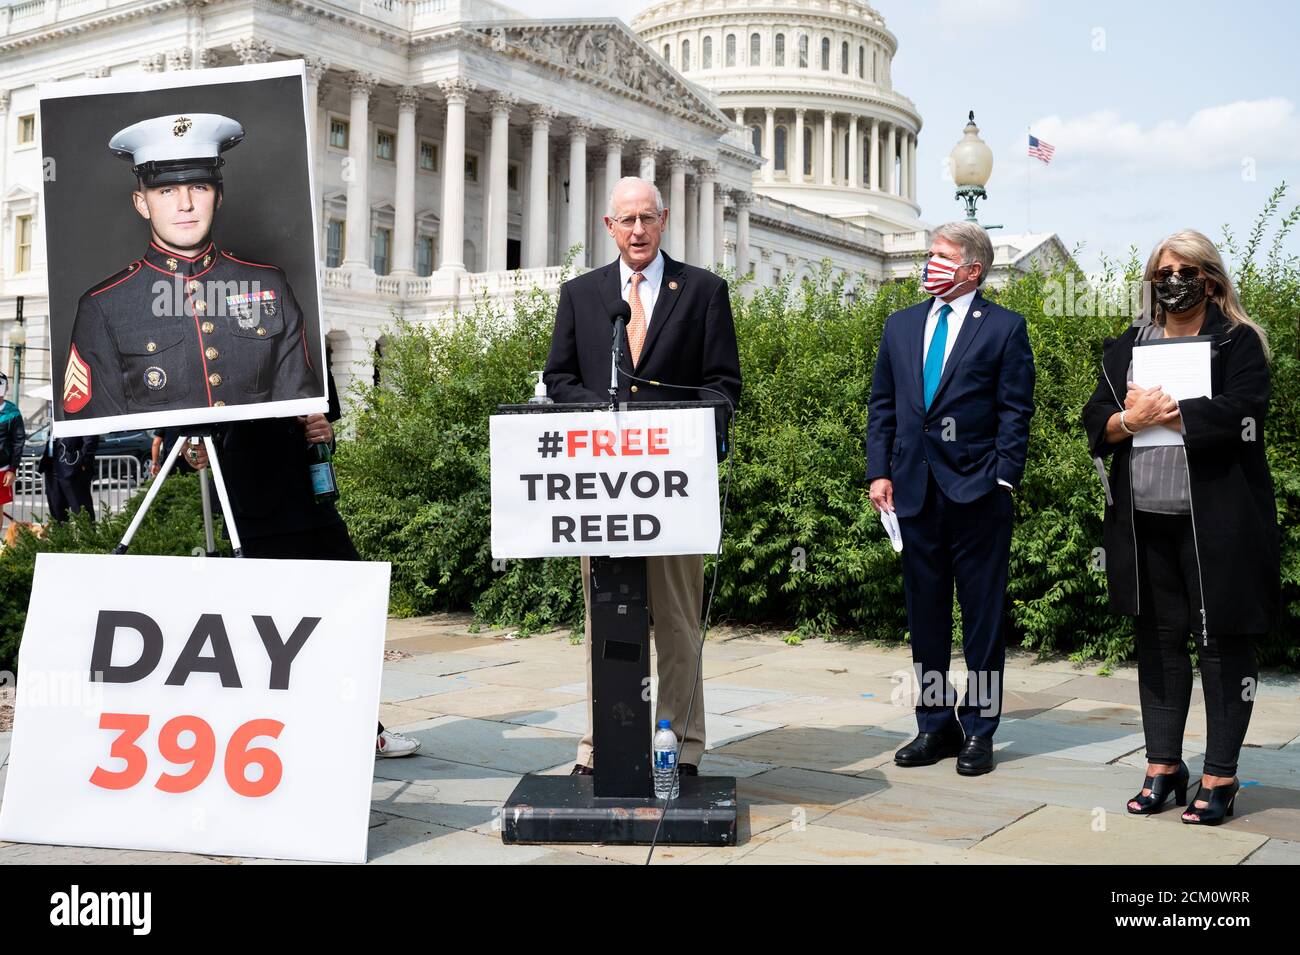 Washington, U.S. 16th Sep, 2020. September 16, 2020 - Washington, DC, United States: U.S. Representative Mike Conaway (R-TX) speaking at a press conference calling for the release of Trevor Reed from a Russian prison. (Photo by Michael Brochstein/Sipa USA) Credit: Sipa USA/Alamy Live News Stock Photo